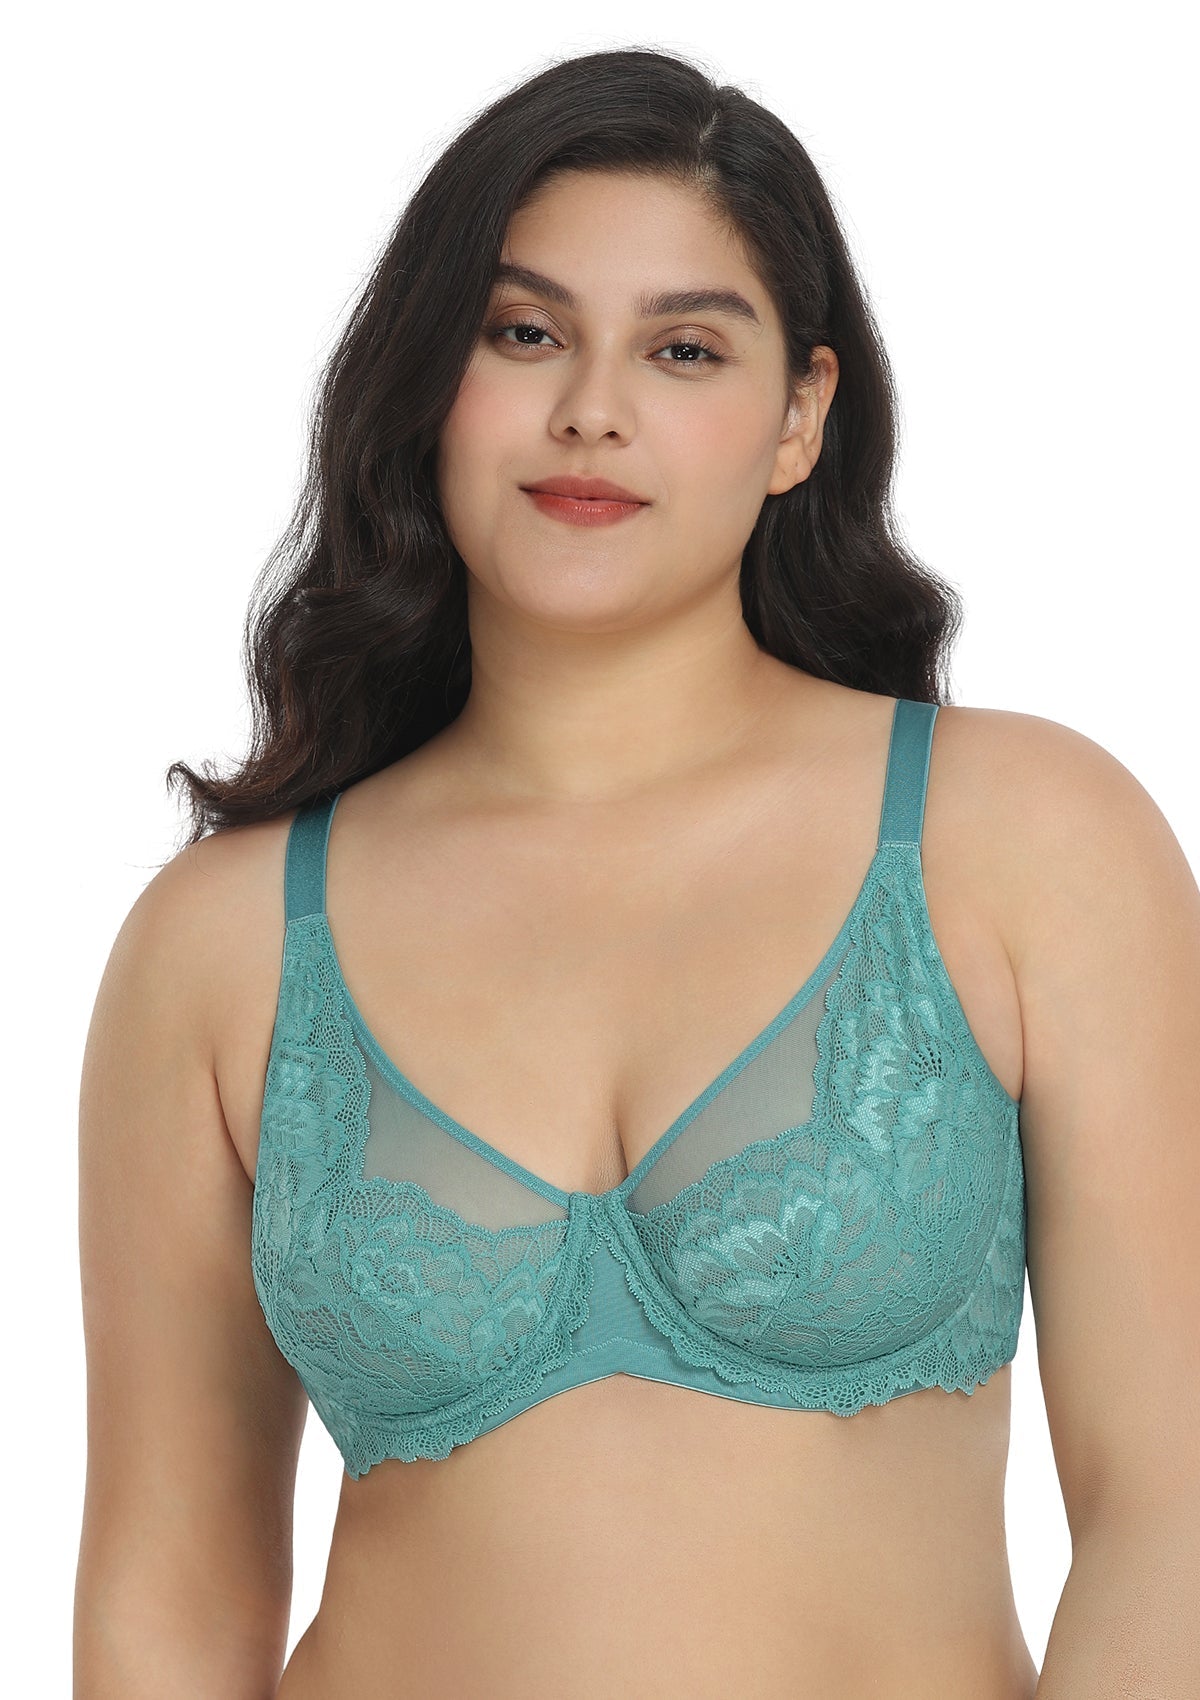 HSIA Paeonia Lace Full Coverage Underwire Non-Padded Uplifting Bra - Teal / 34 / C